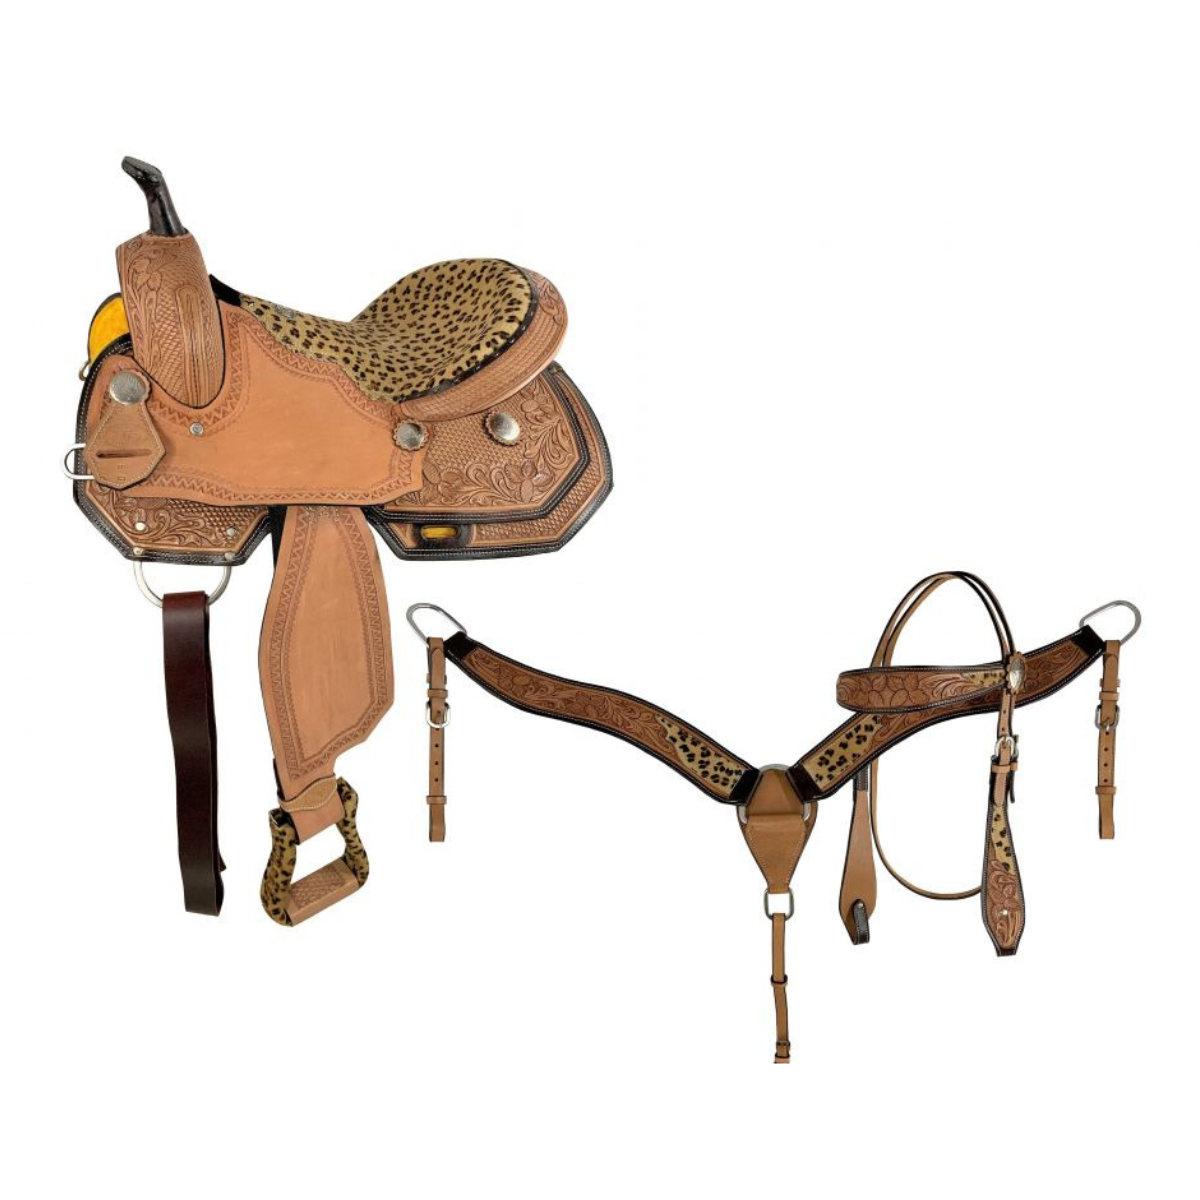 15" Double T  combo basketweave and floral tooling Barrel saddle Set with Hair on Cheetah Seat - Double T Saddles